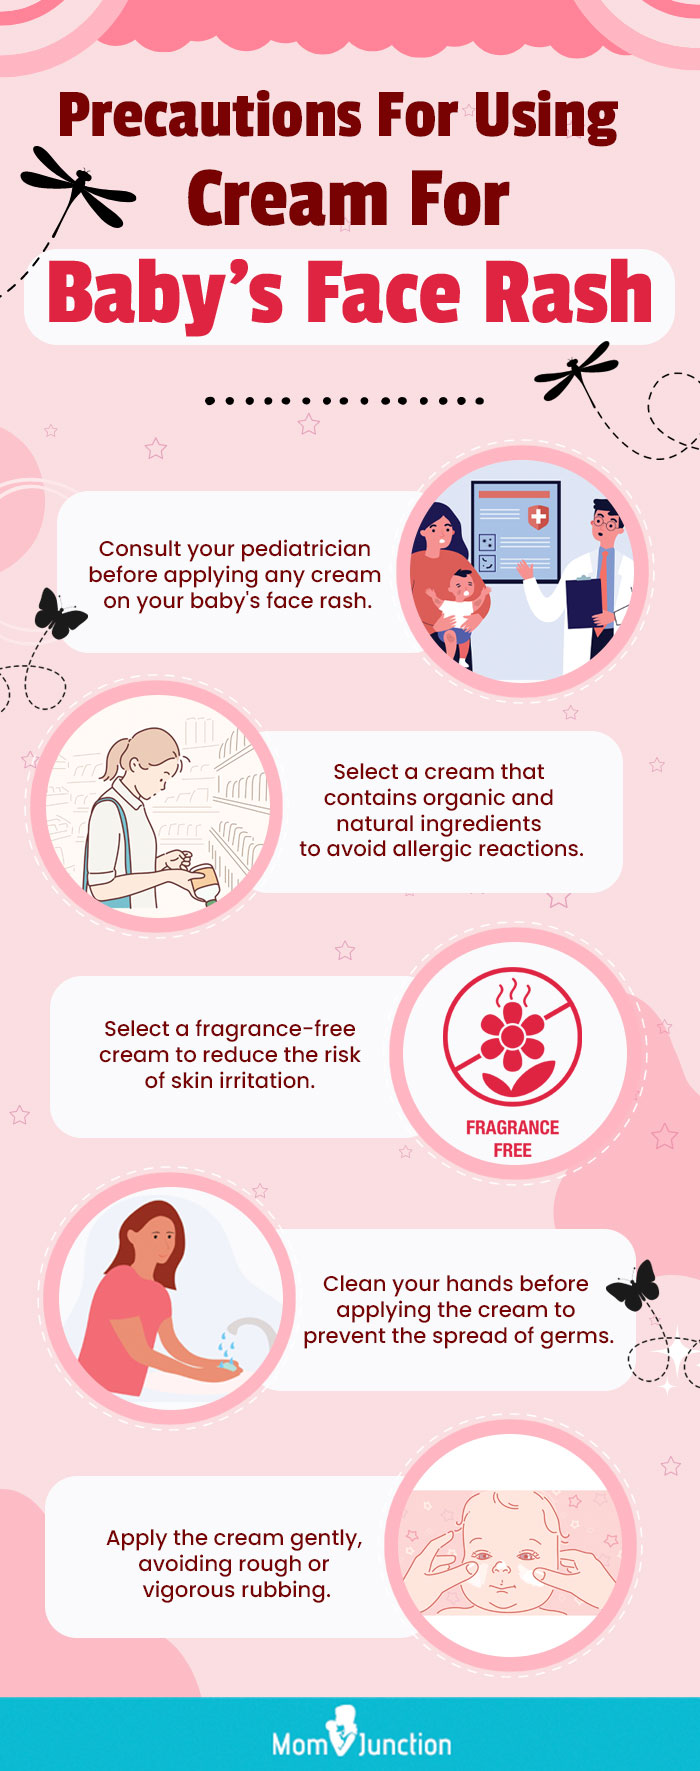 Precautions-For-Using-Cream-For-Baby’s-Face-Rash (infographic)